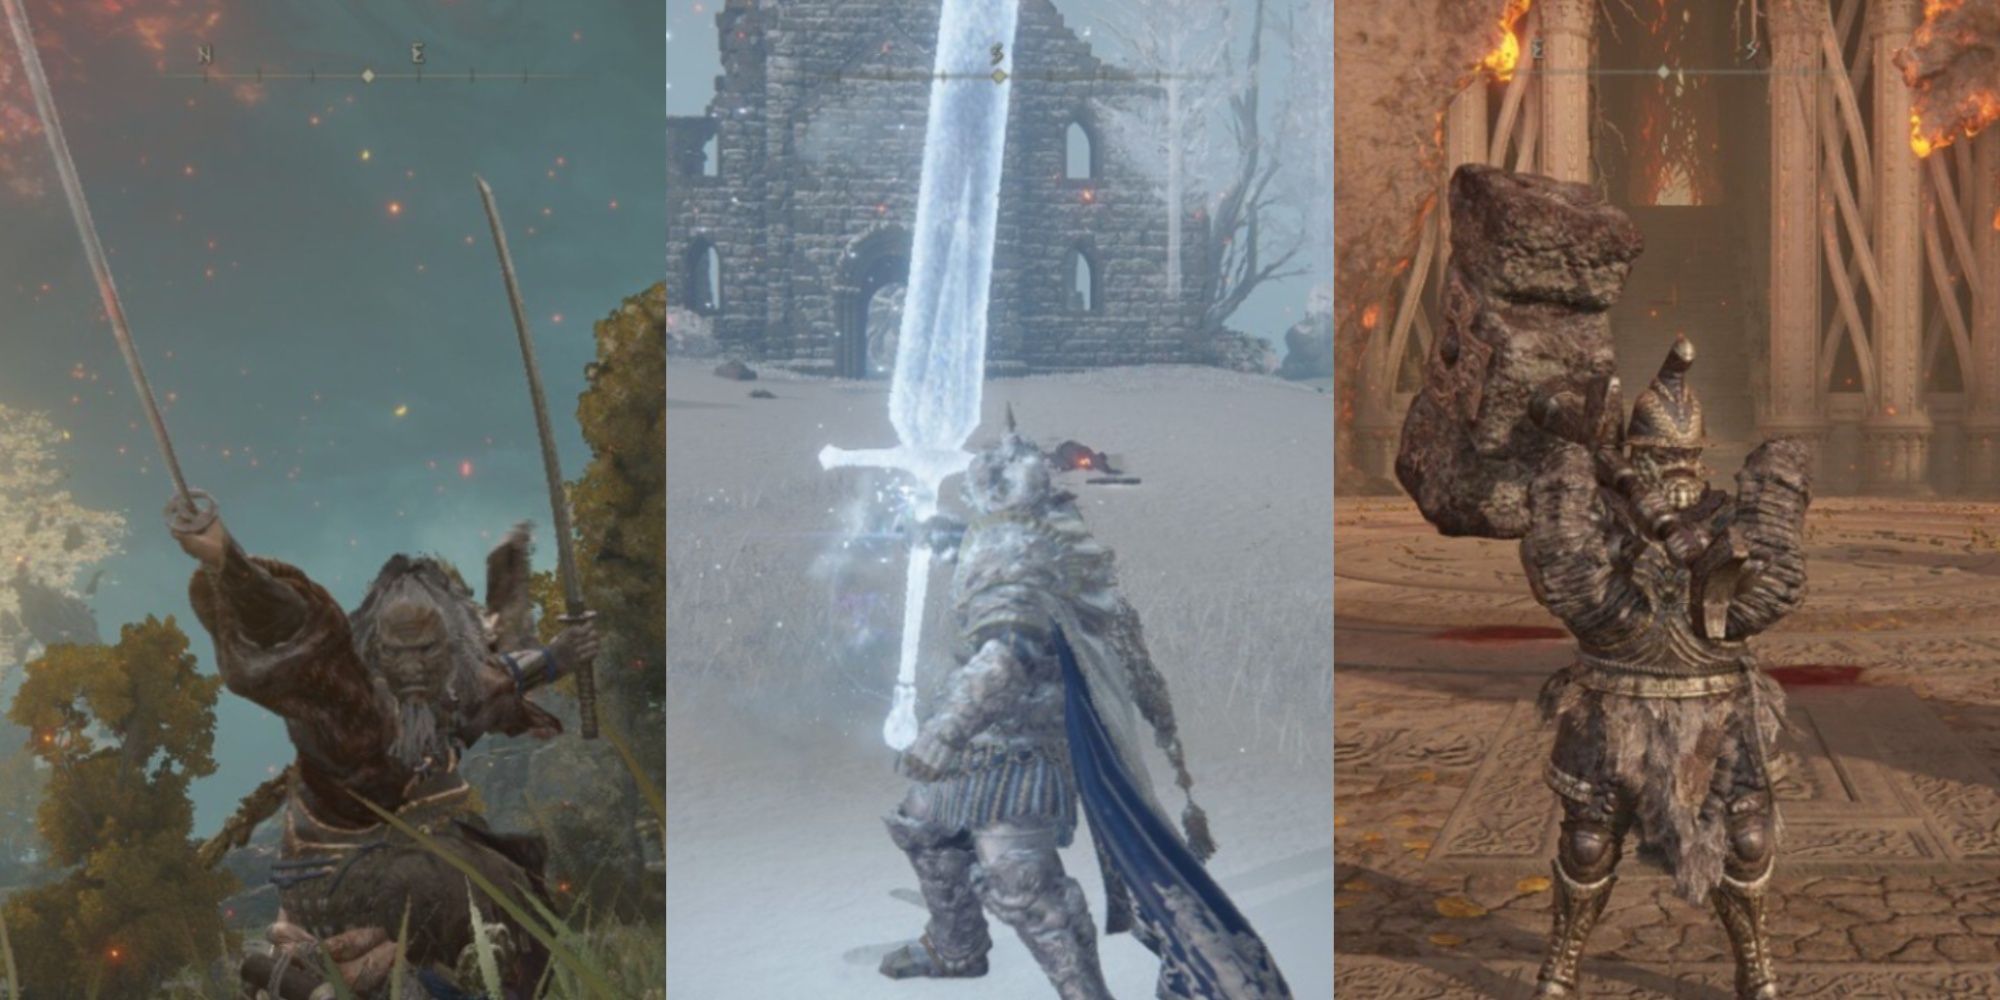 Elden Ring characters using katanas, a frost blade, and a stone hammer in various landscapes